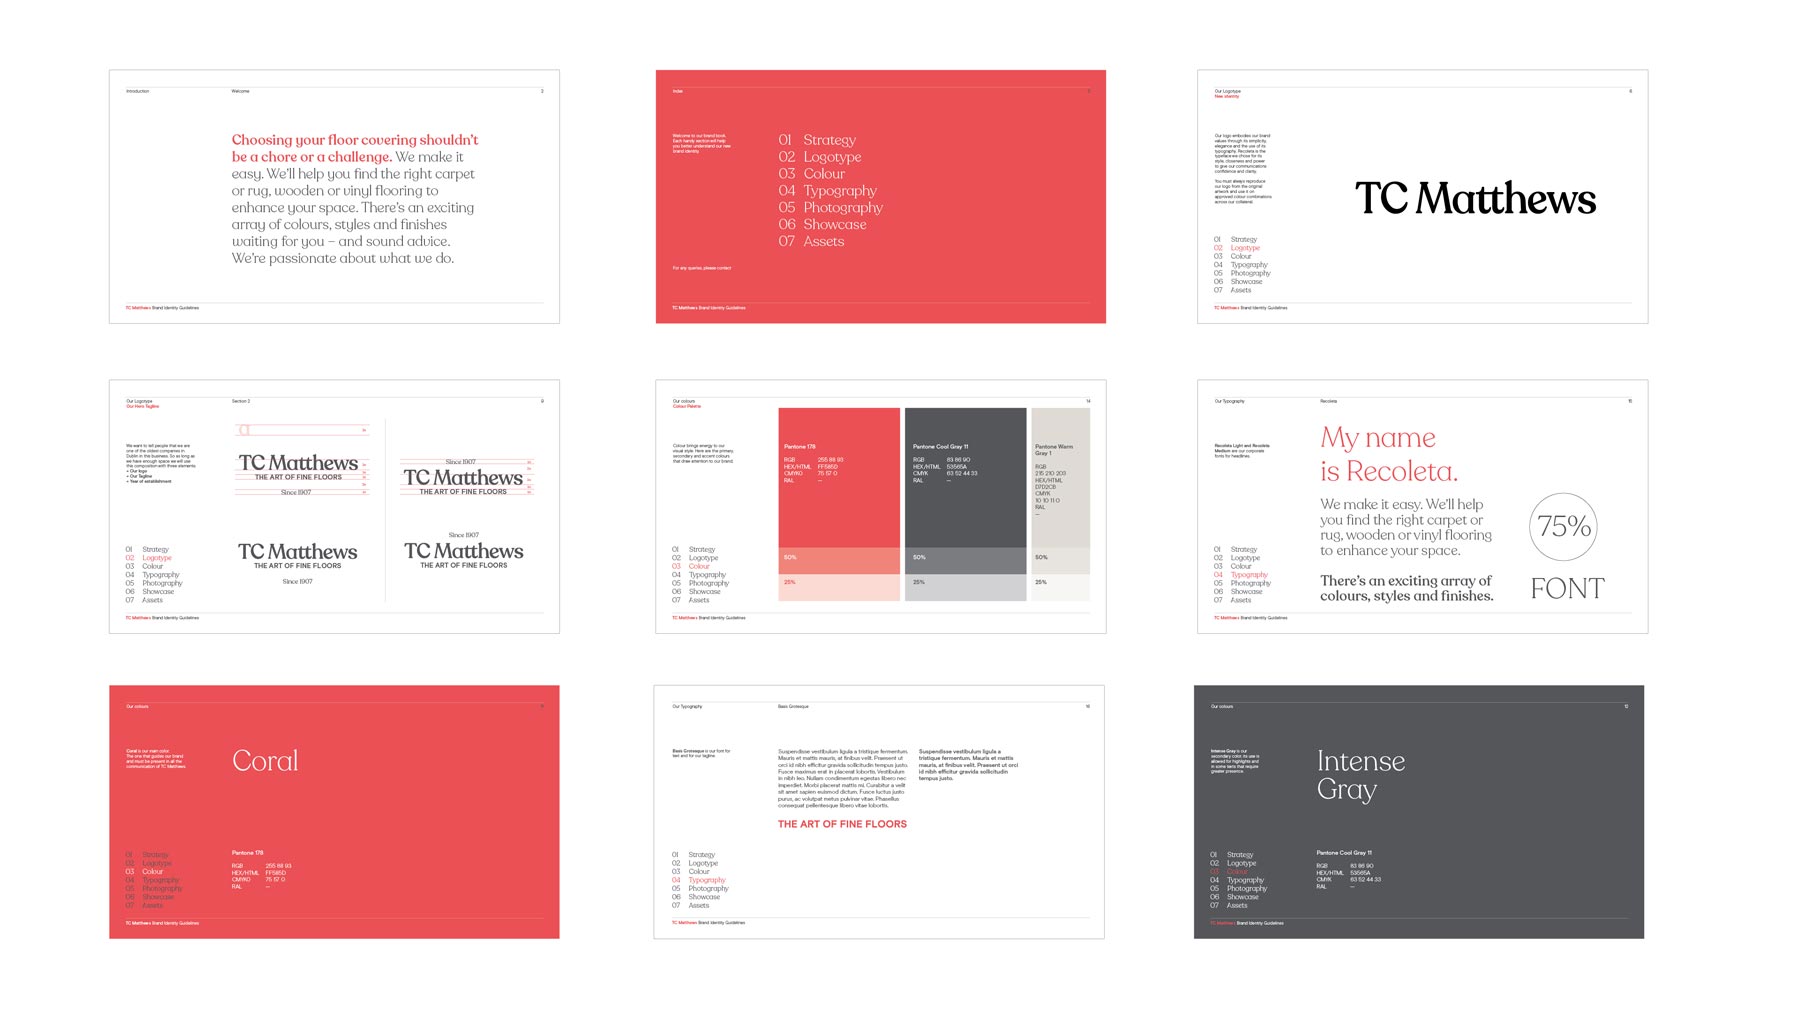 Mockup of brand guidelines for TC Matthews rebrand, including typefaces and color palettes